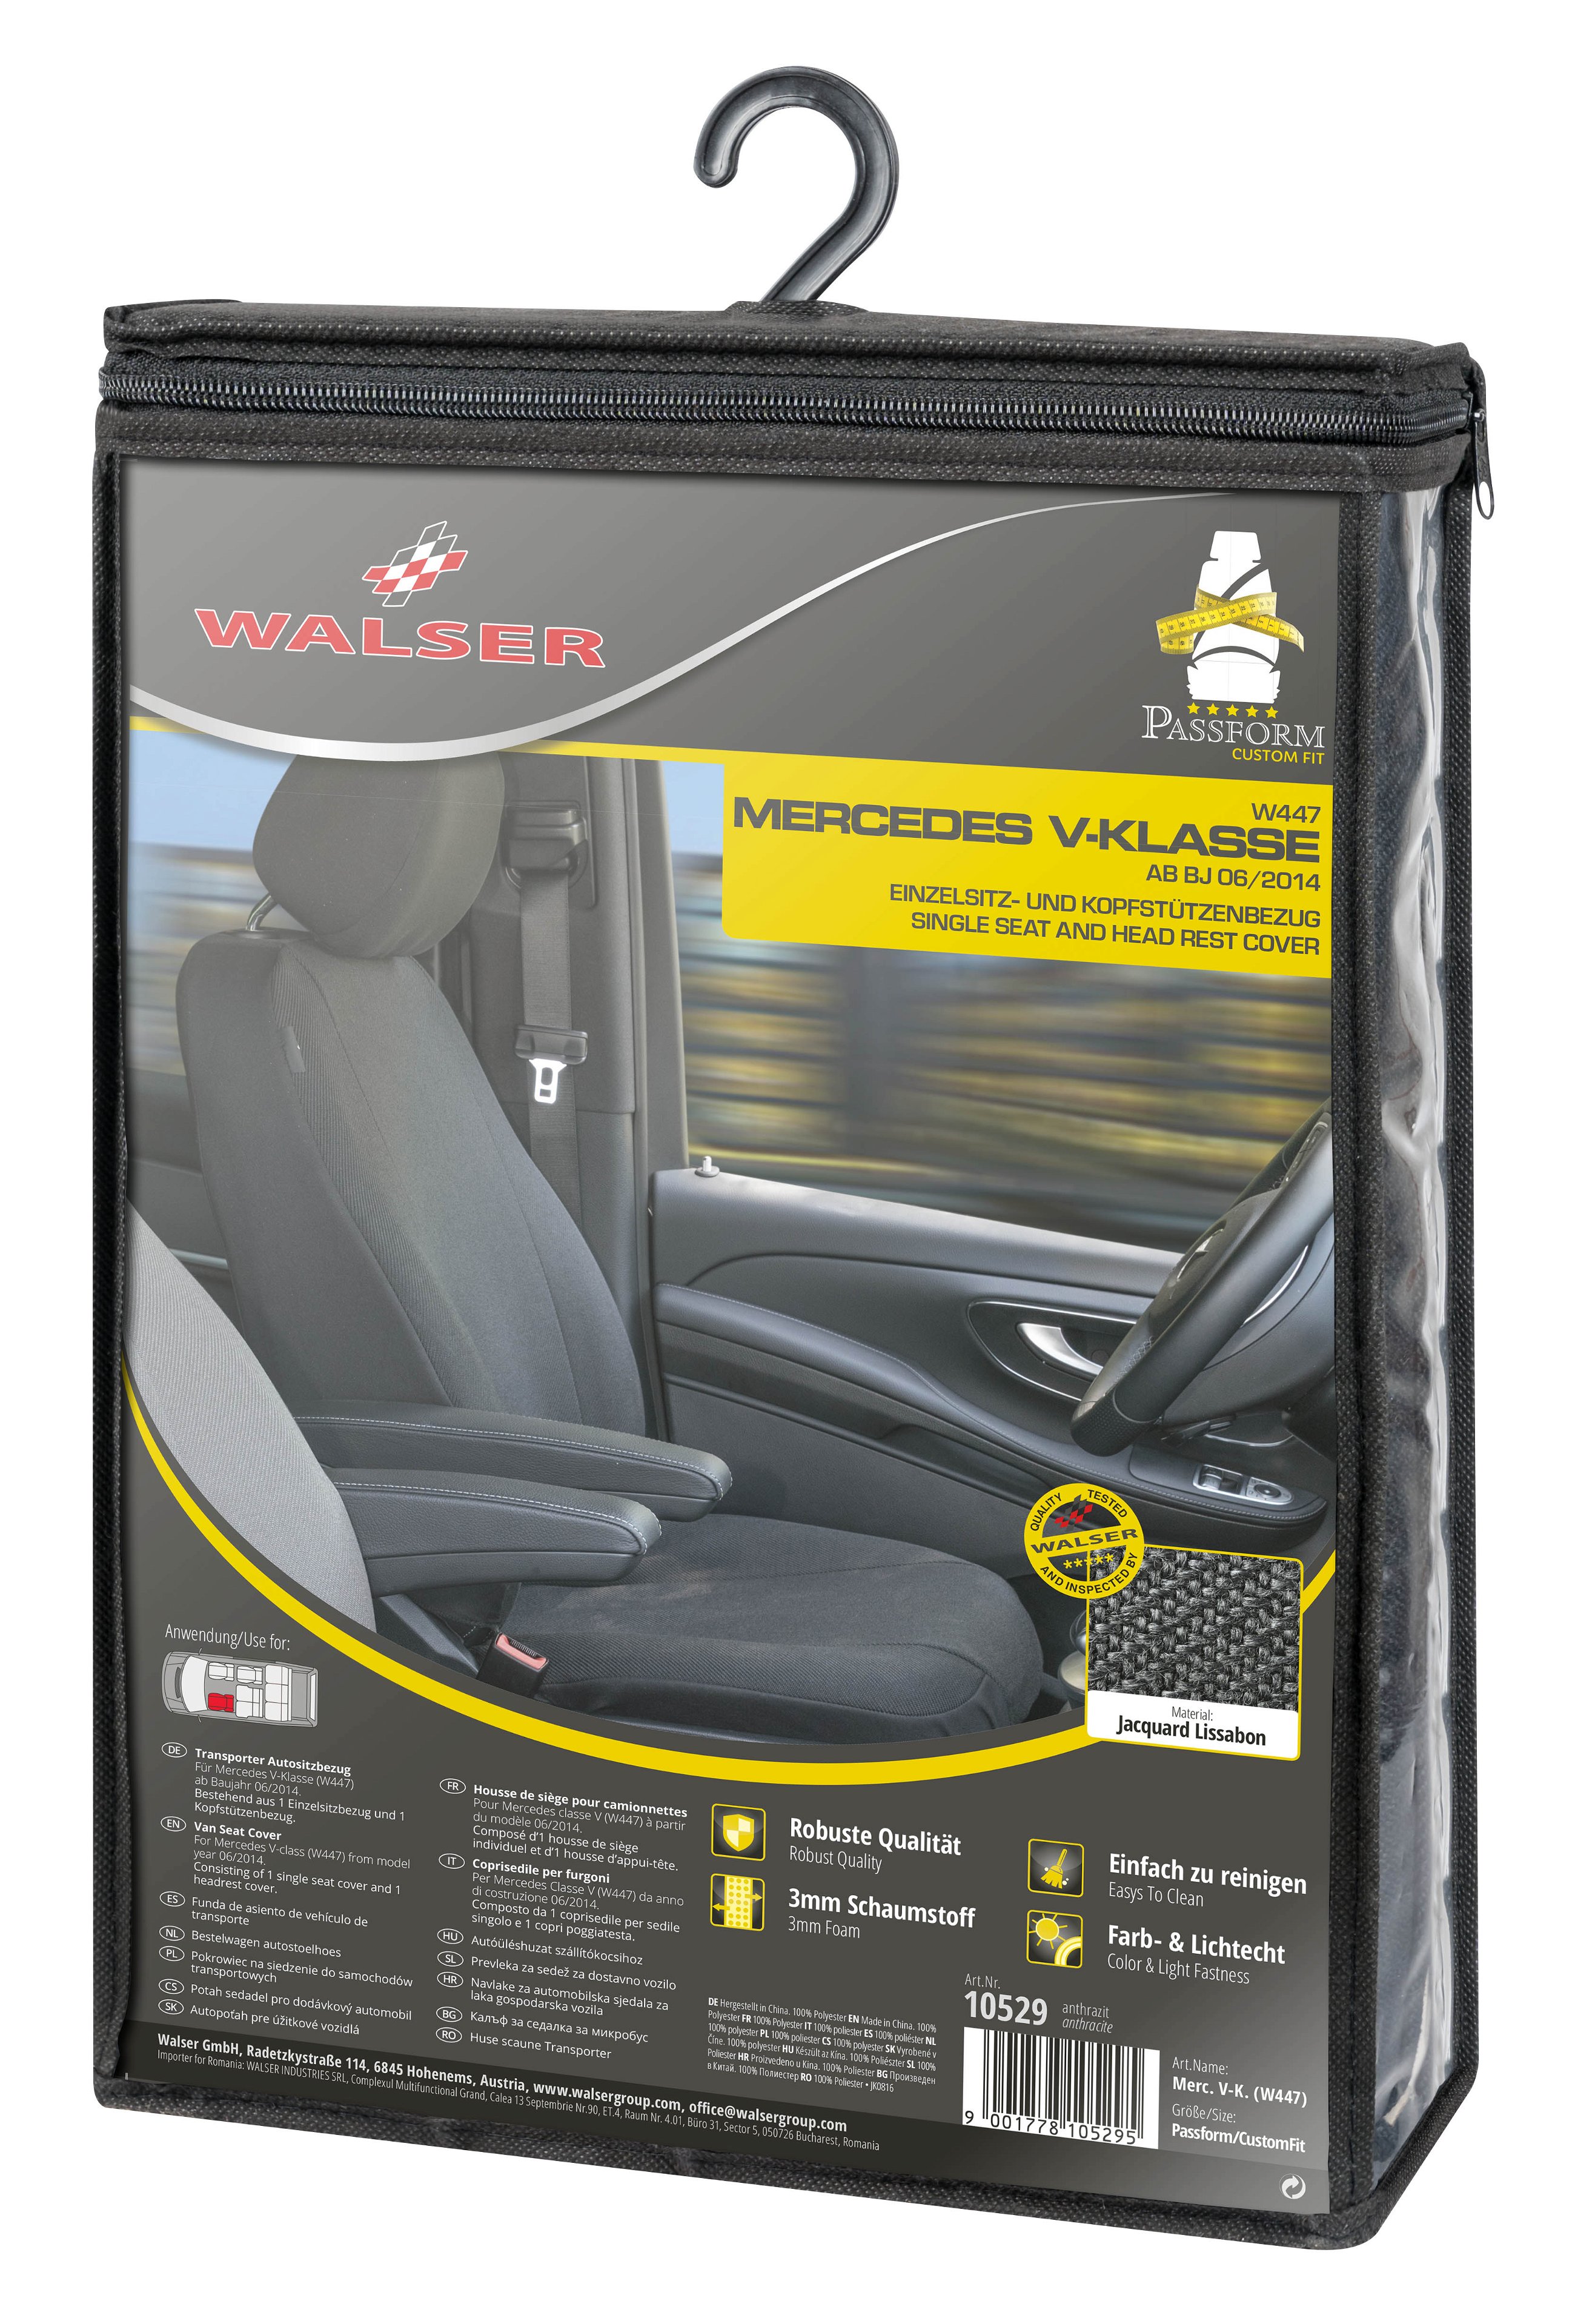 Seat cover made of fabric for Mercedes V-Class 447, single seat cover driver armrest inside